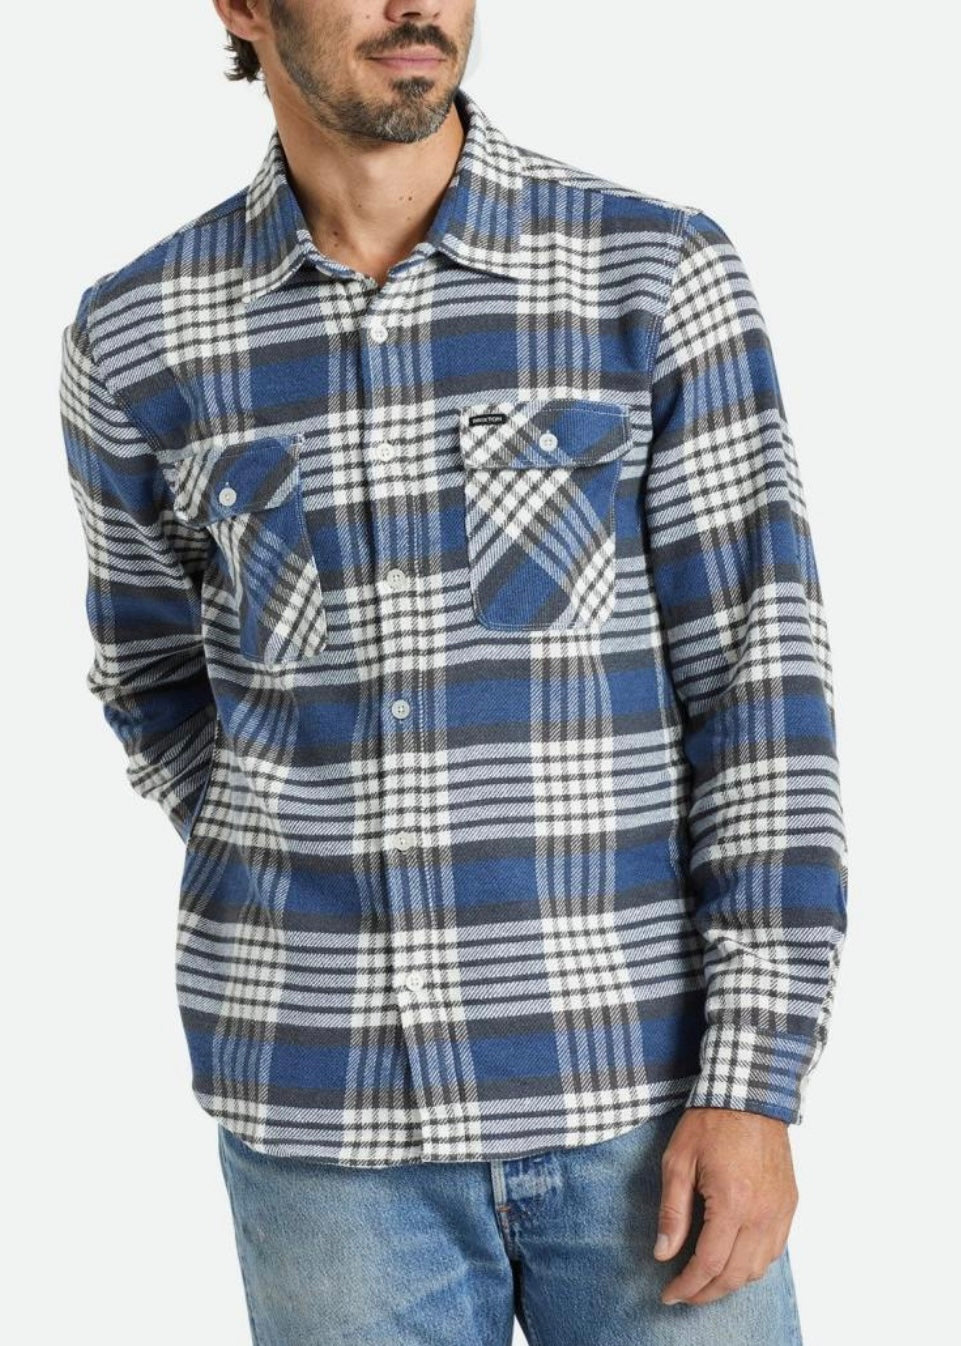 Bowery Flannel - Pacific Blue, White & Black